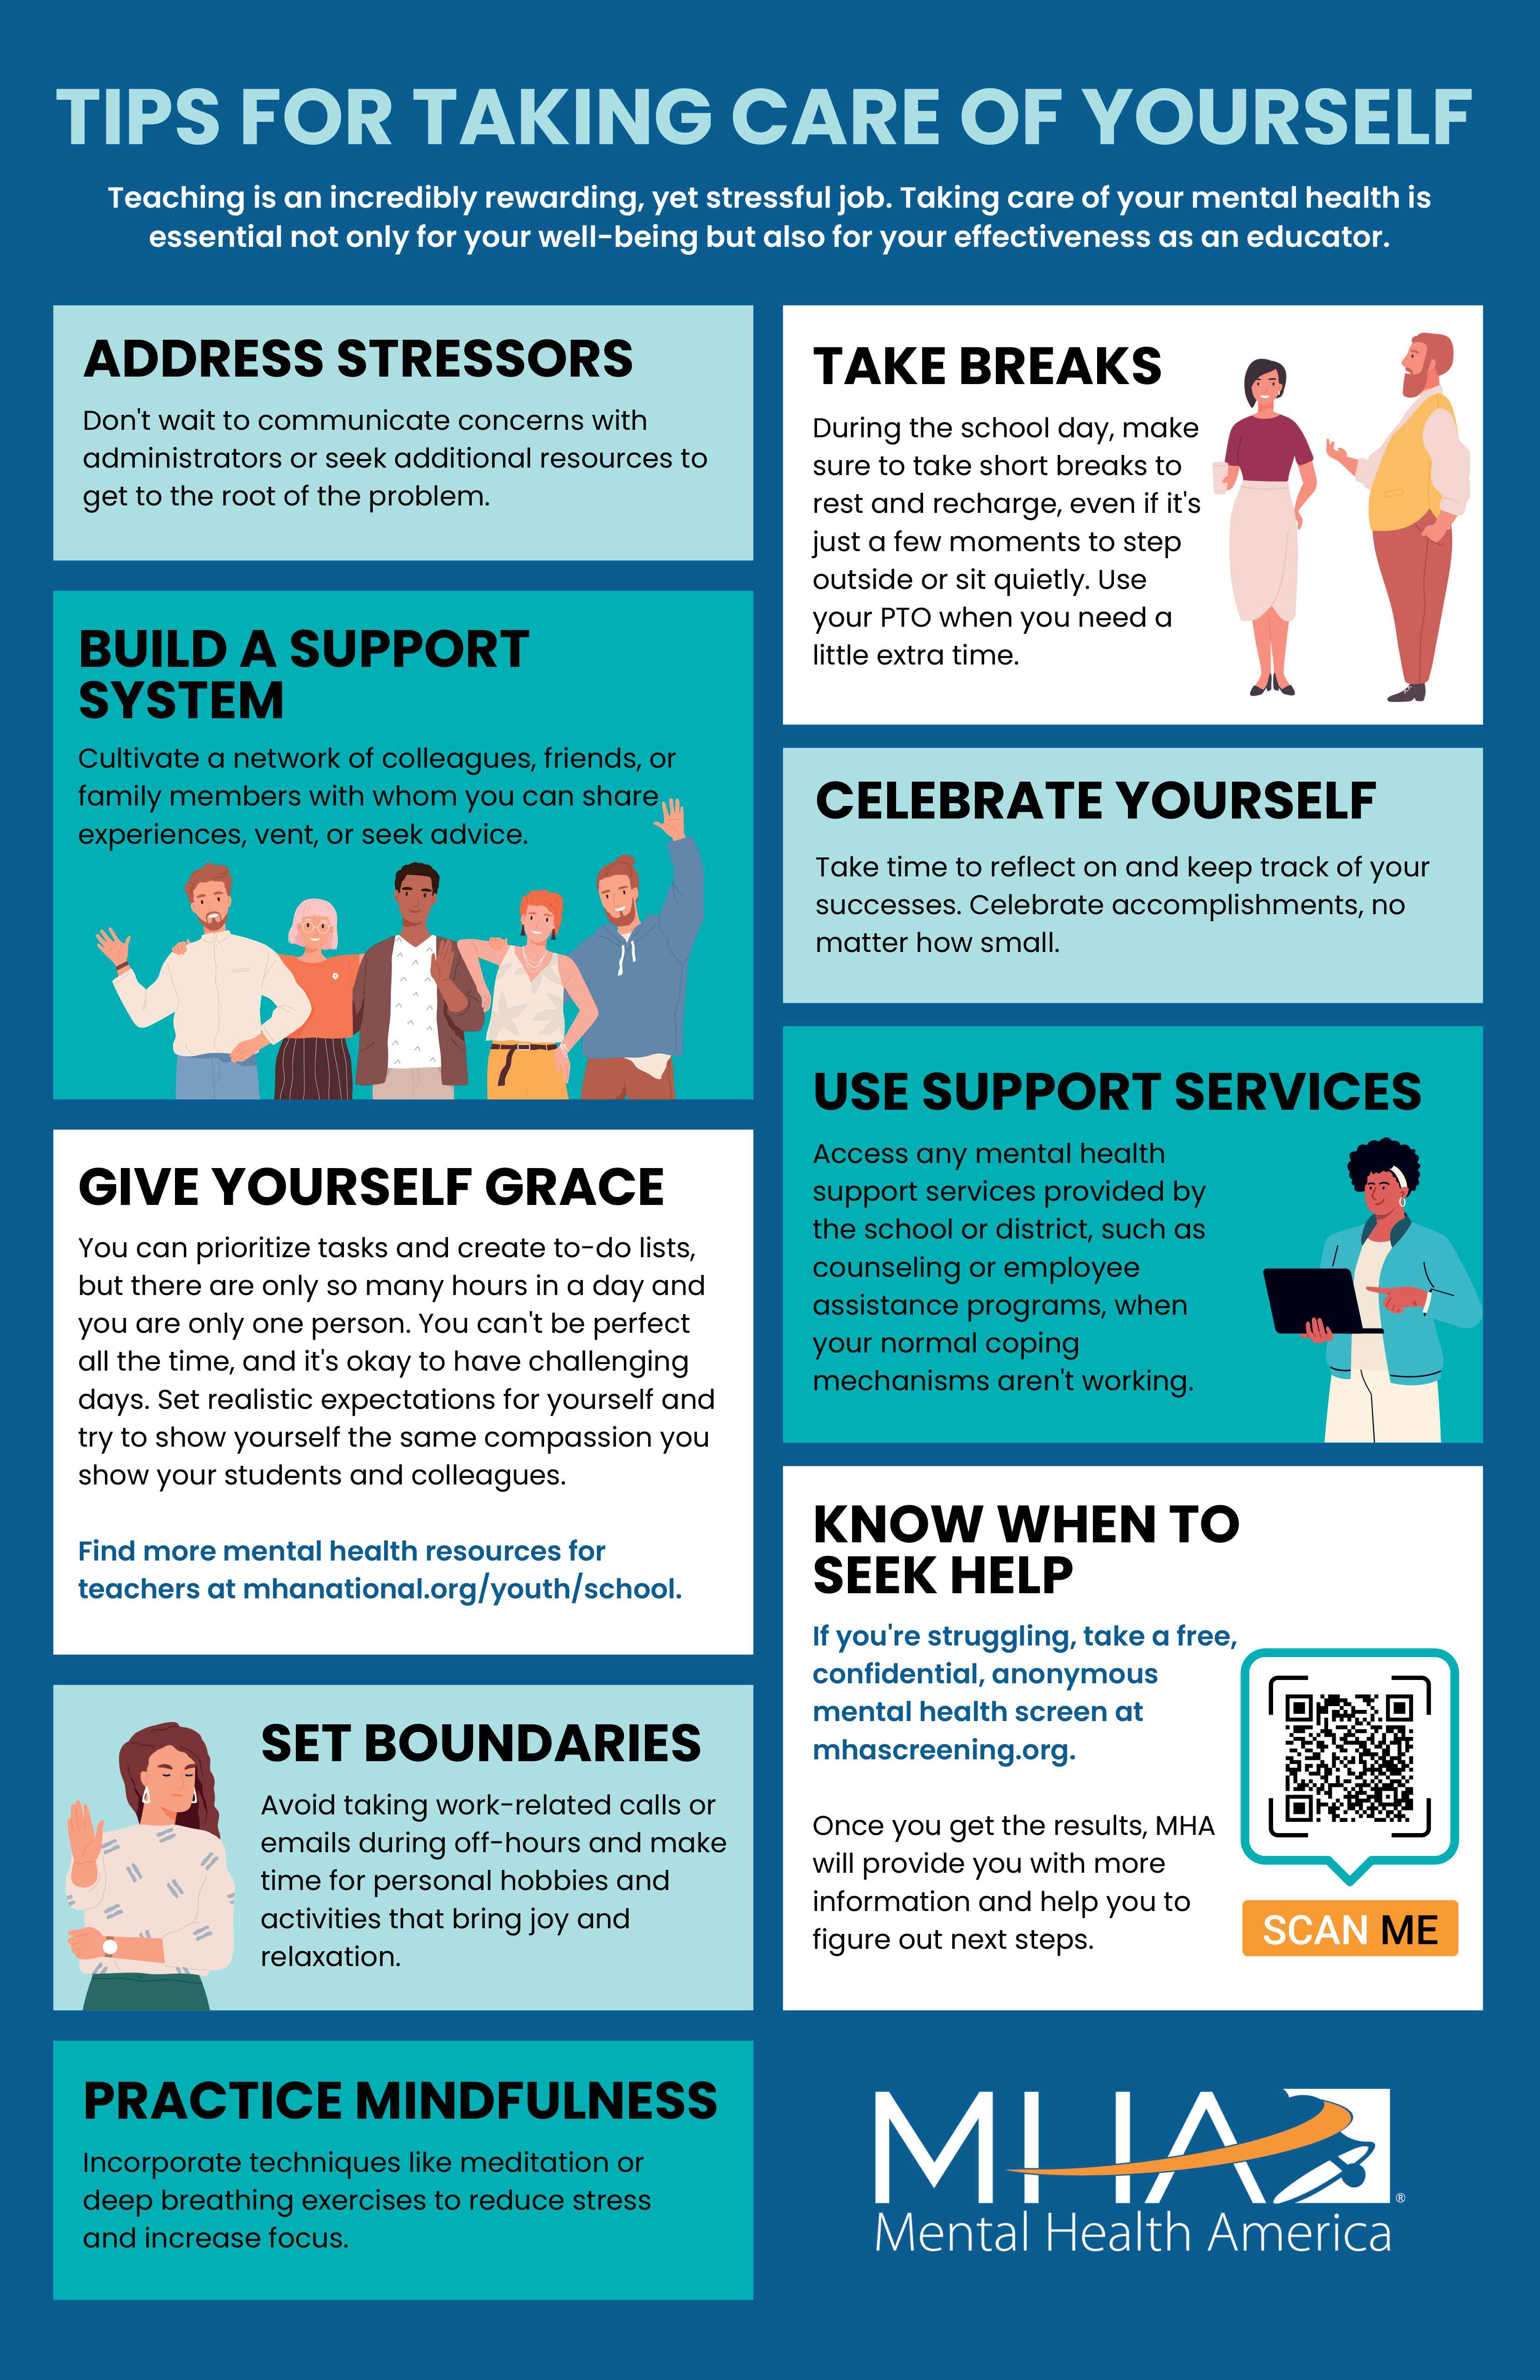 Tips for taking care of yourself | Teaching is an incredibly rewarding, yet stressful job. Taking care of your mental health is essential...